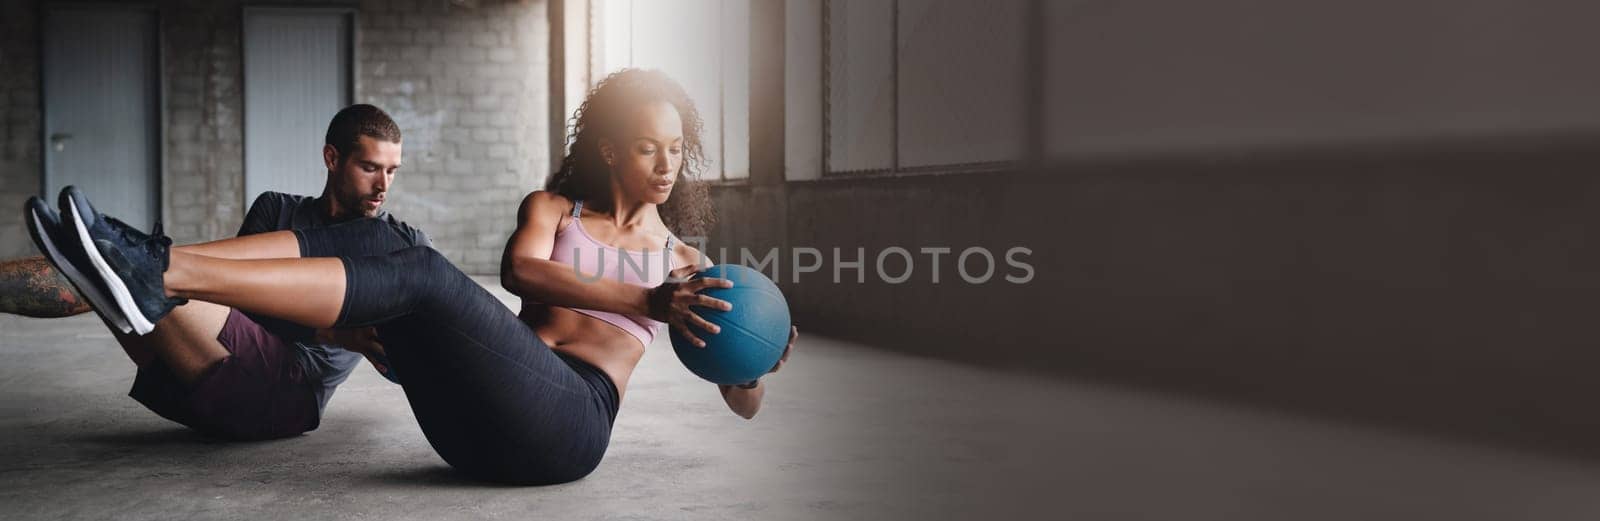 Gym, banner and couple exercise with ball, weight or training cardio fitness together. Mockup, space and people workout body with weightlifting, sit up or lifting legs for wellness, goals or pilates.